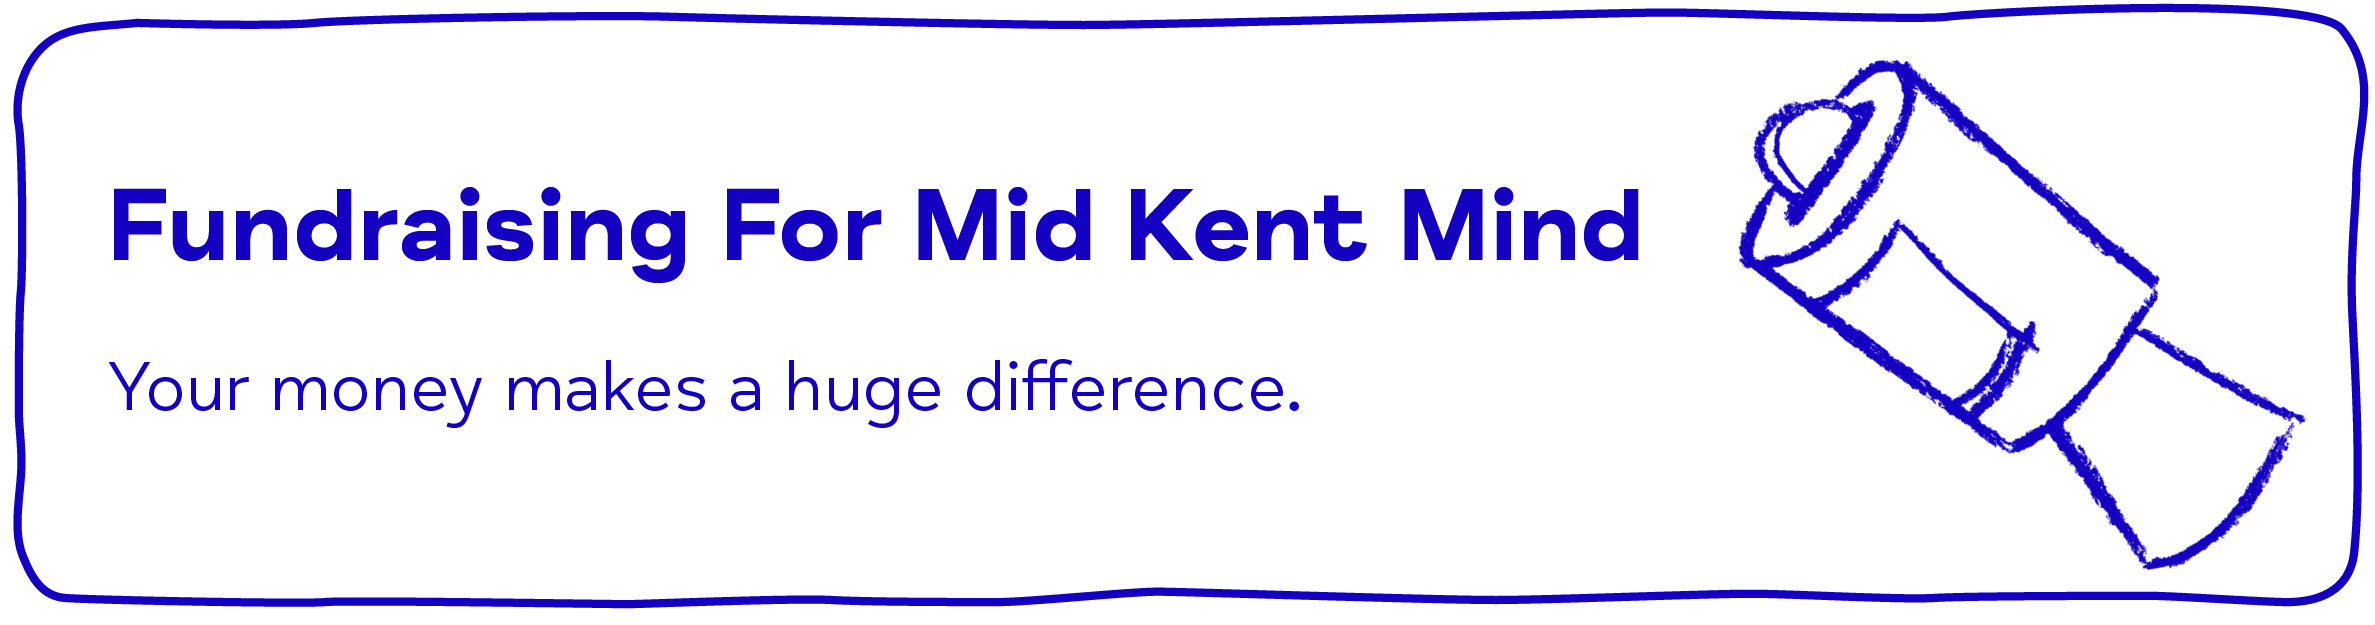 Fundraising For Mid Kent Mind. Your money makes a huge difference.